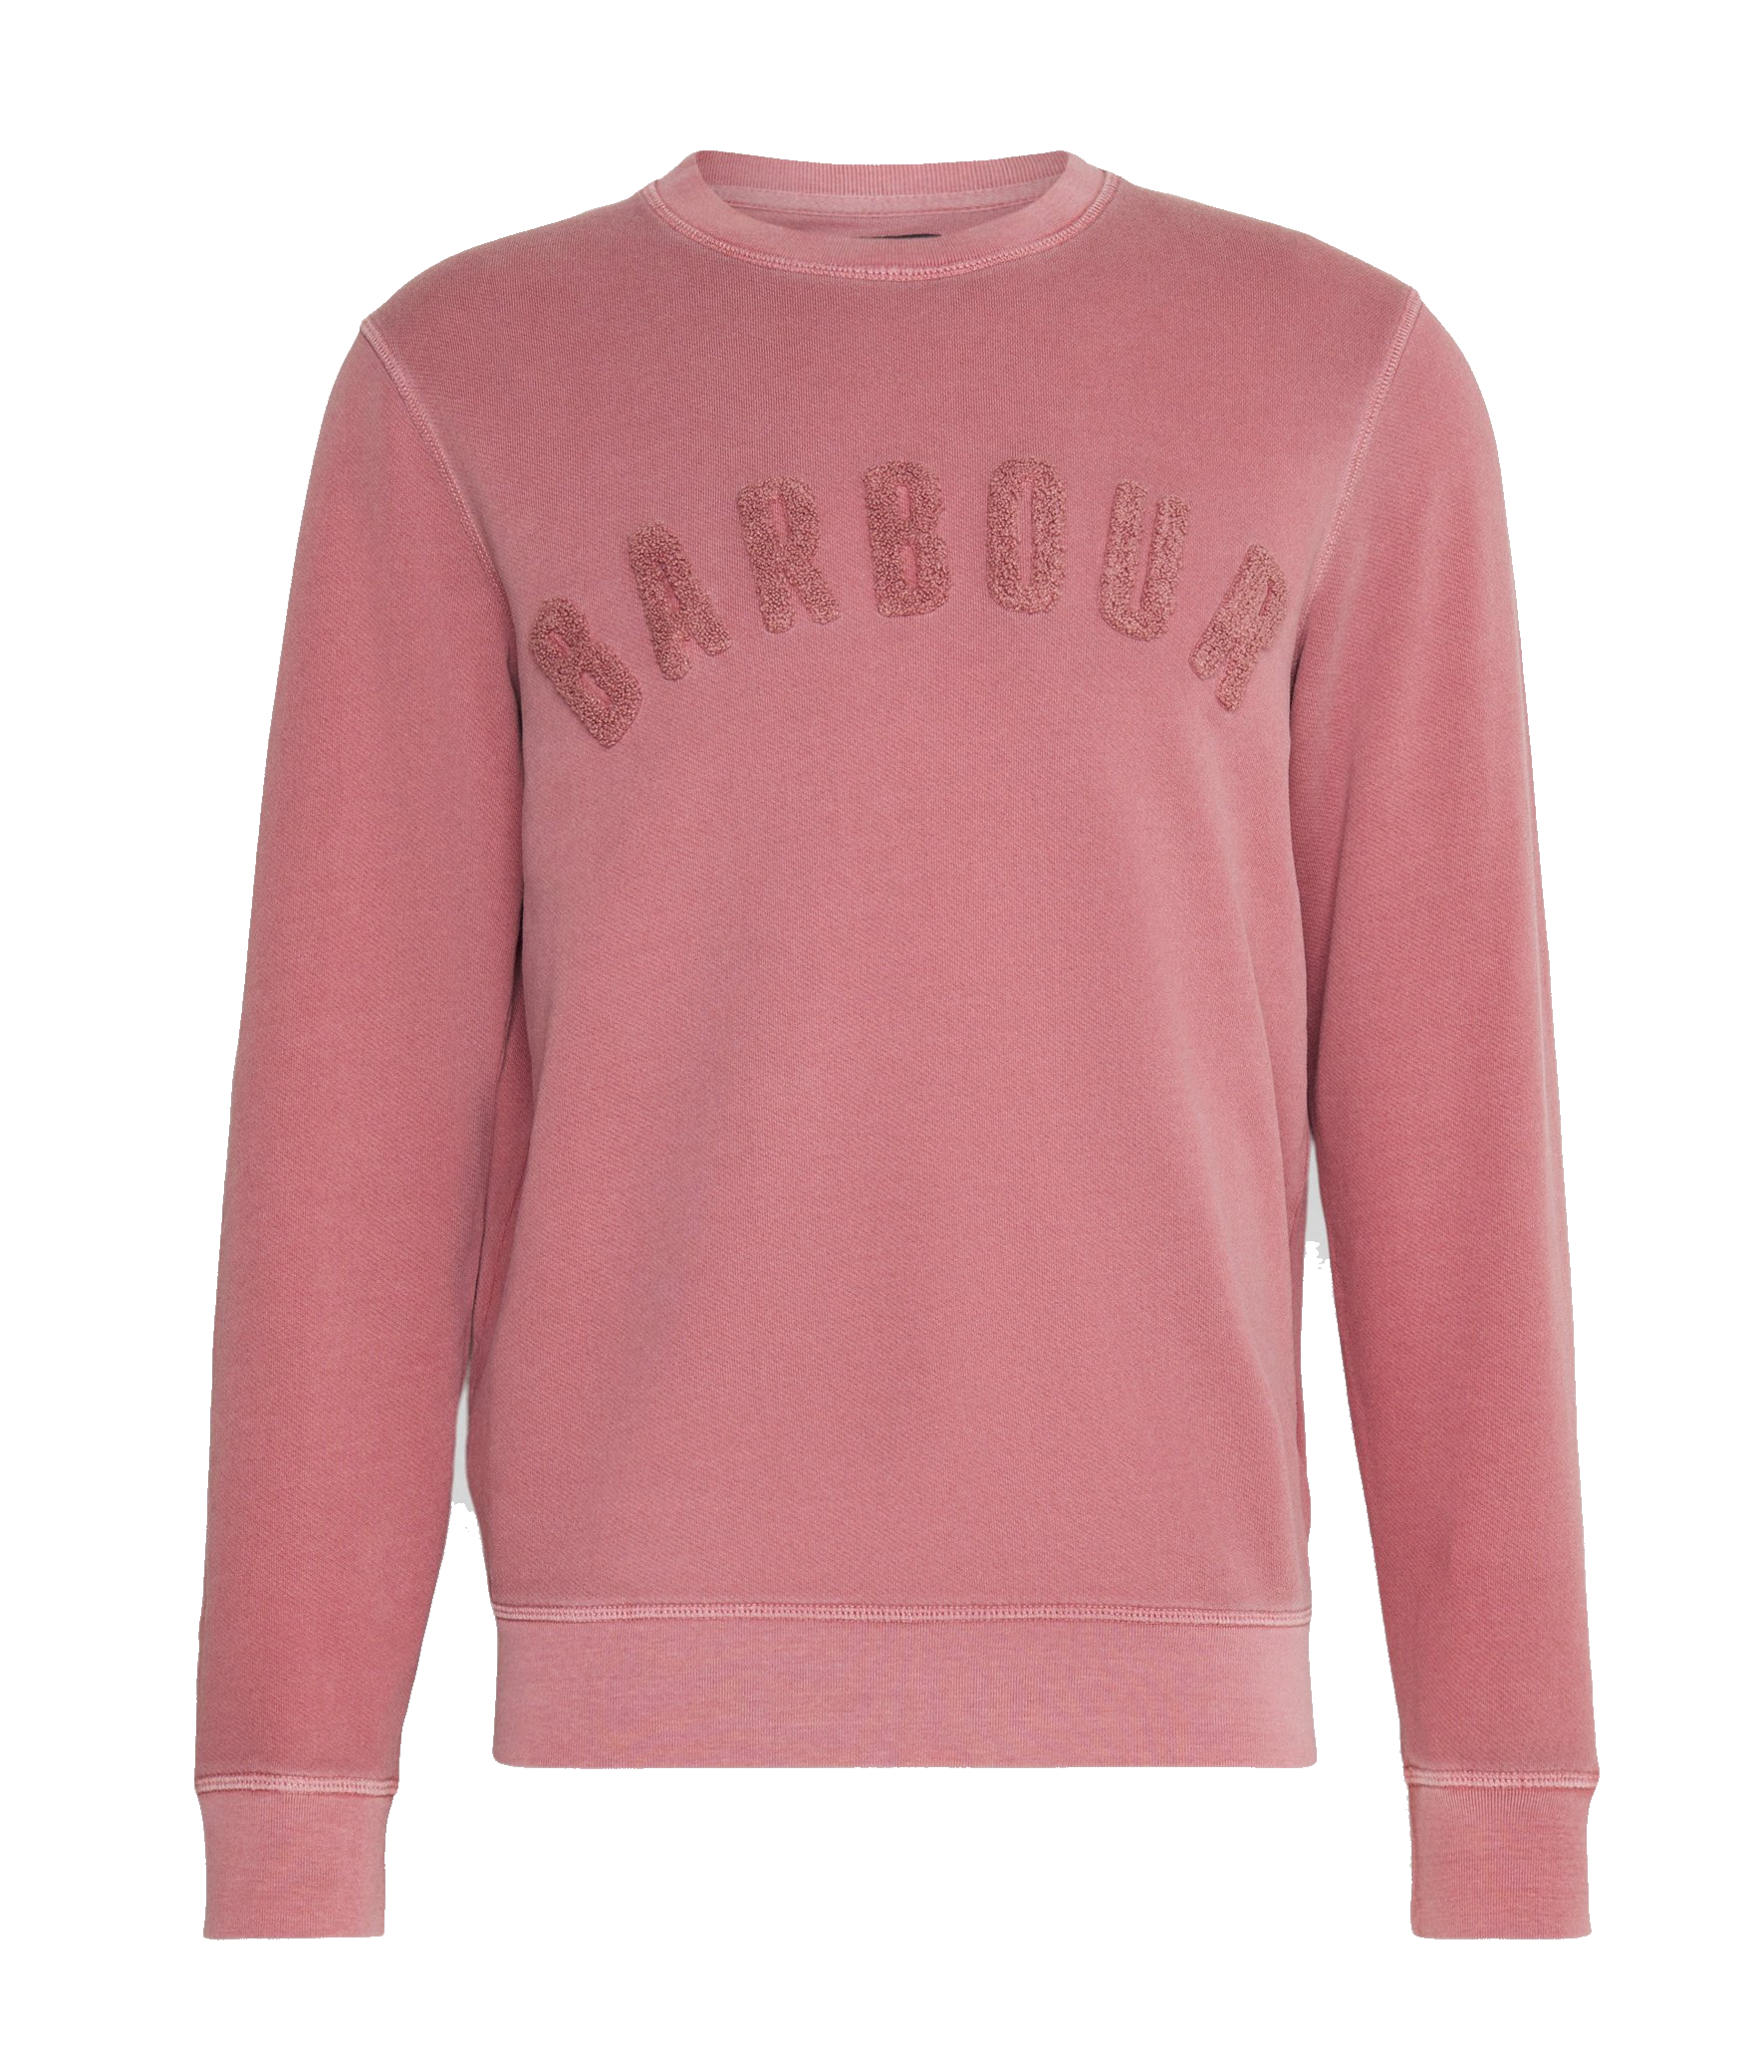 Barbour Washed Prep Logo Sweatshirt Faded Pink